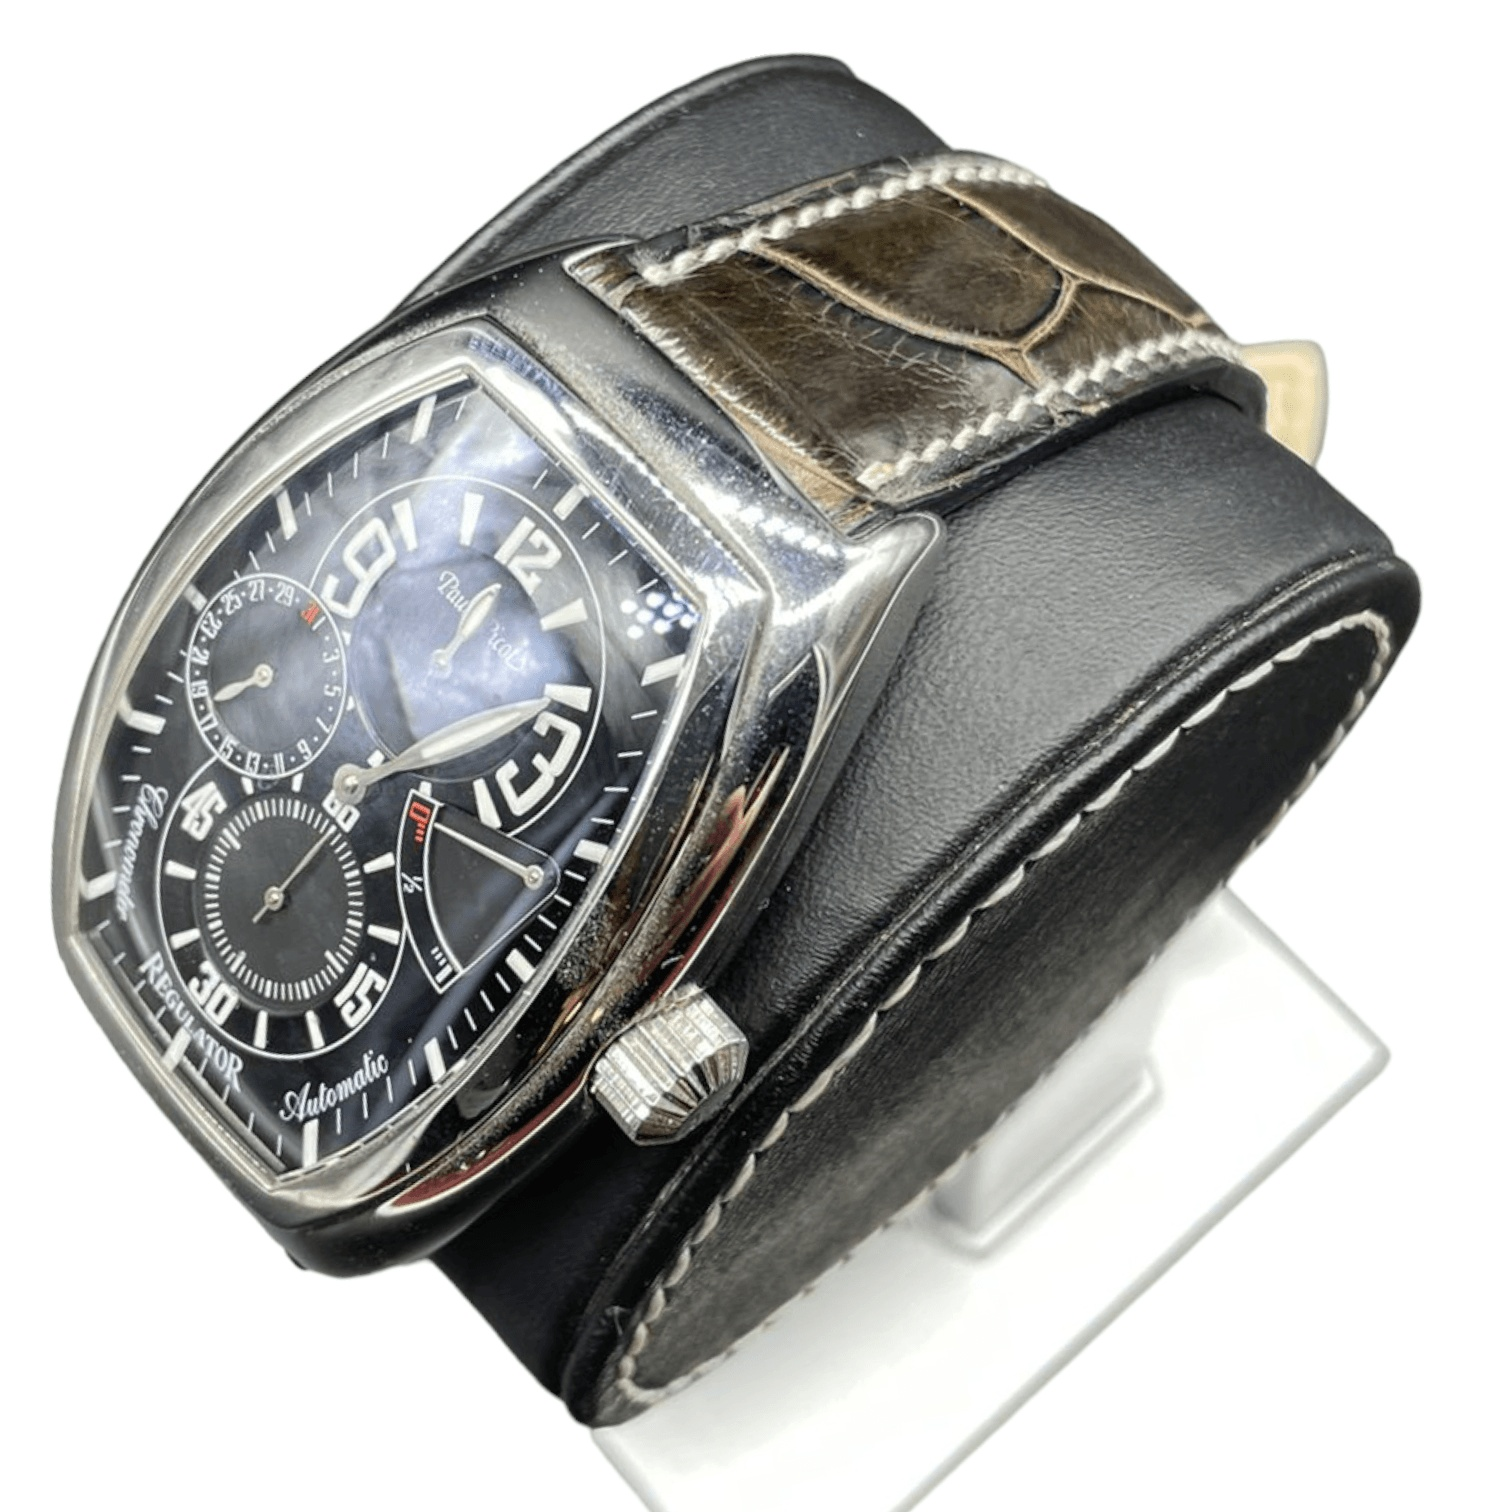 Paul Picot Firshire 3000 Regulateur Ref. 0740S - ON5835 - LuxuryInStock